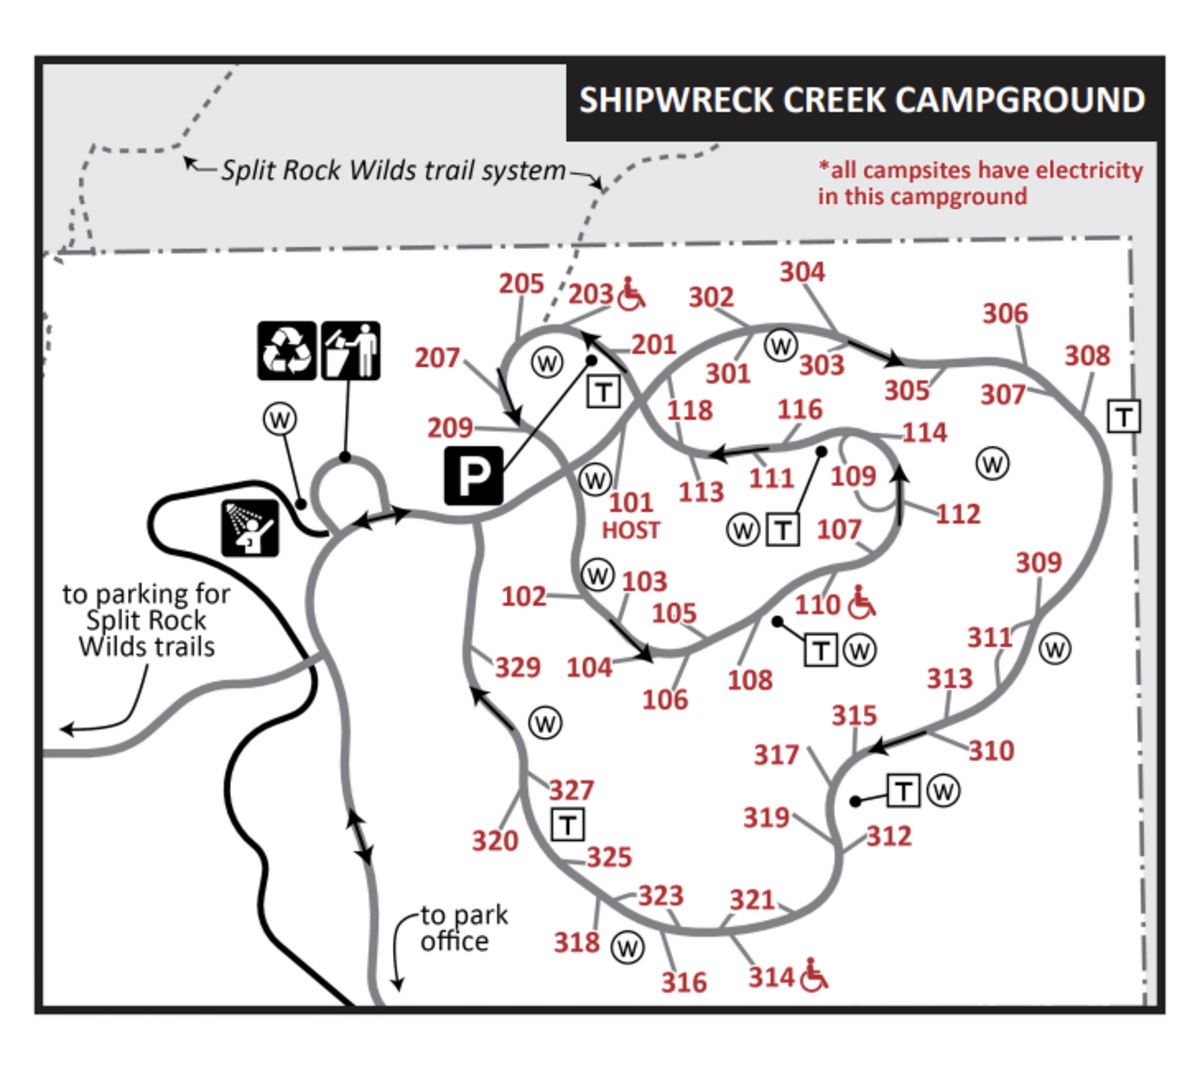 A close-up map of the campsites at the new Shipwreck Creek Campground.